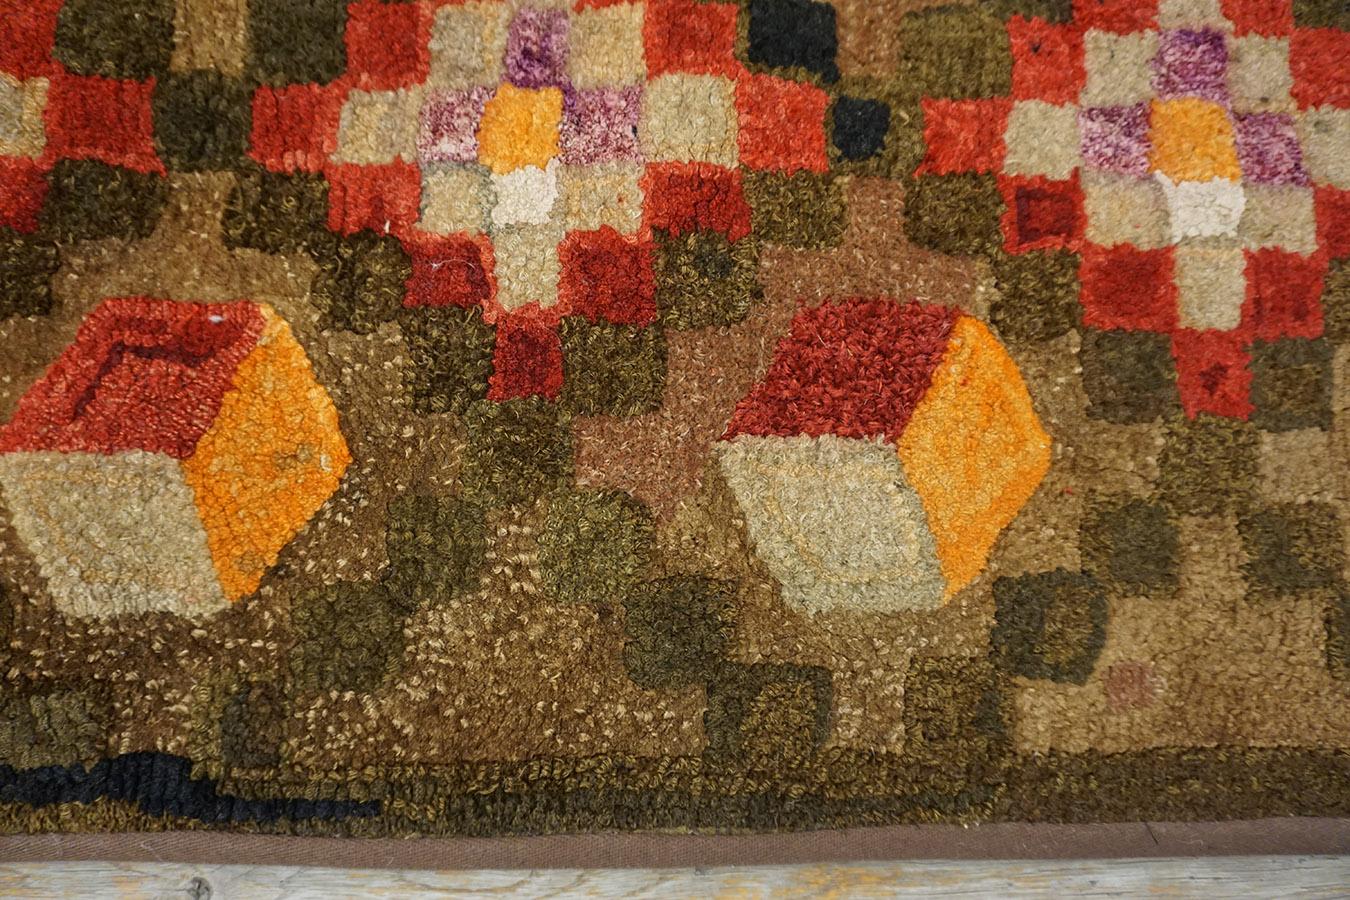 Early 20th Century American Hooked Rug ( 1'10